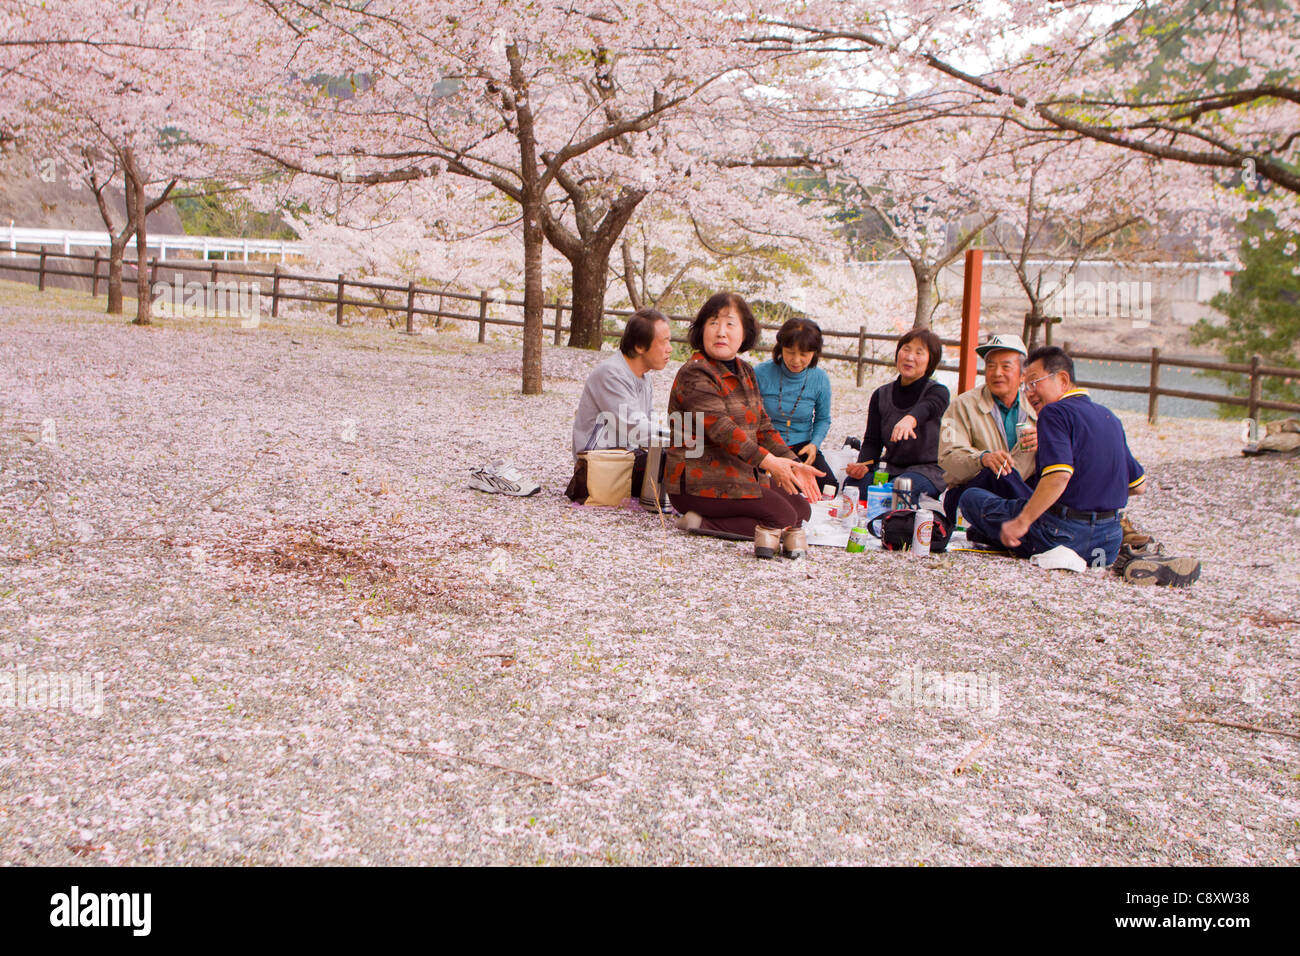 A family enjoying a picnic under the cherry blossom in Japan. Stock Photo